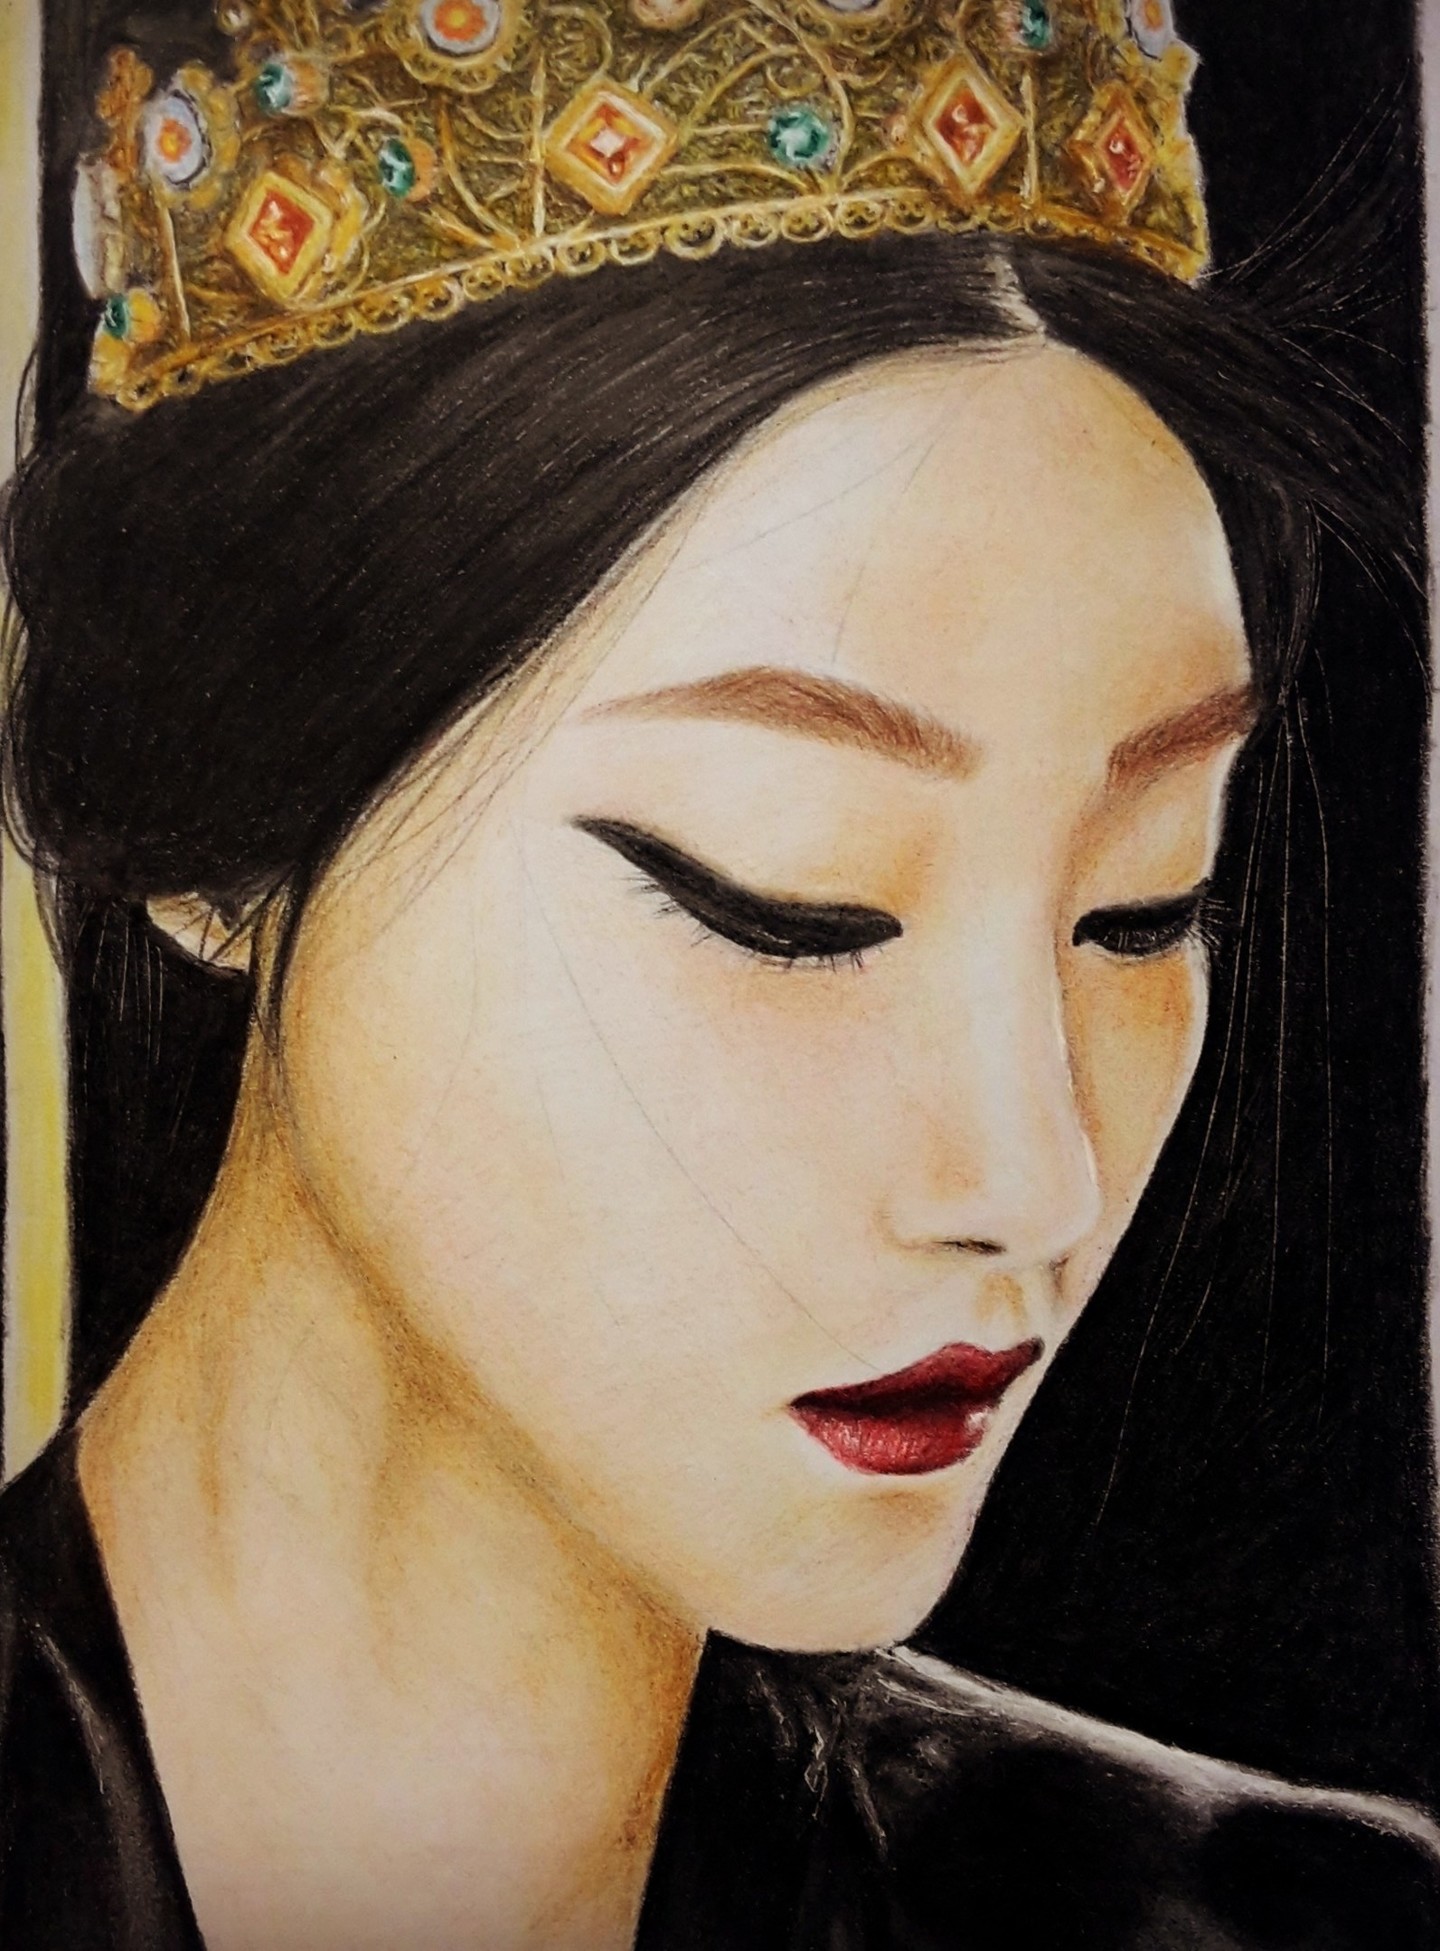 Chinese Girl, Painting by Fairytale.My98